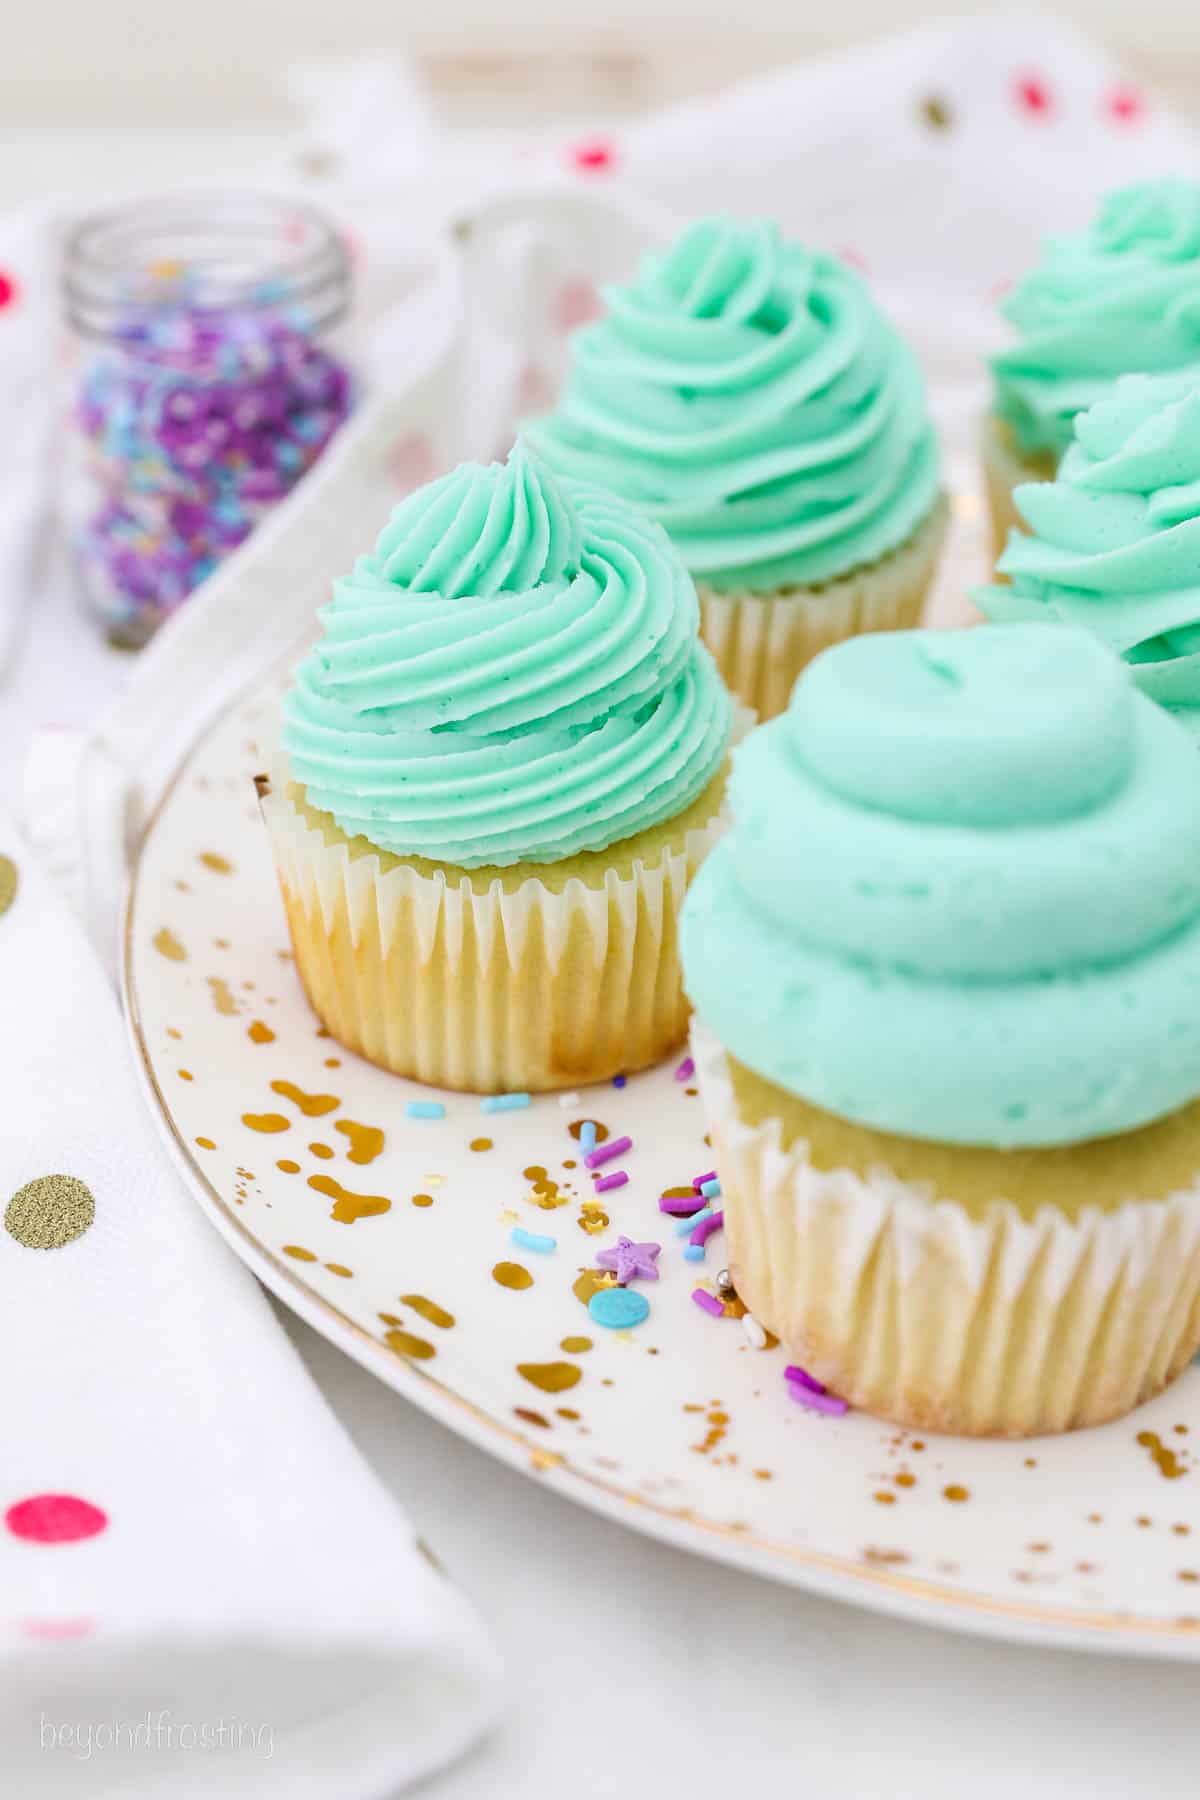 Vanilla cupcakes topped with swirls of teal frosting, piped with various piping tips on a plate.